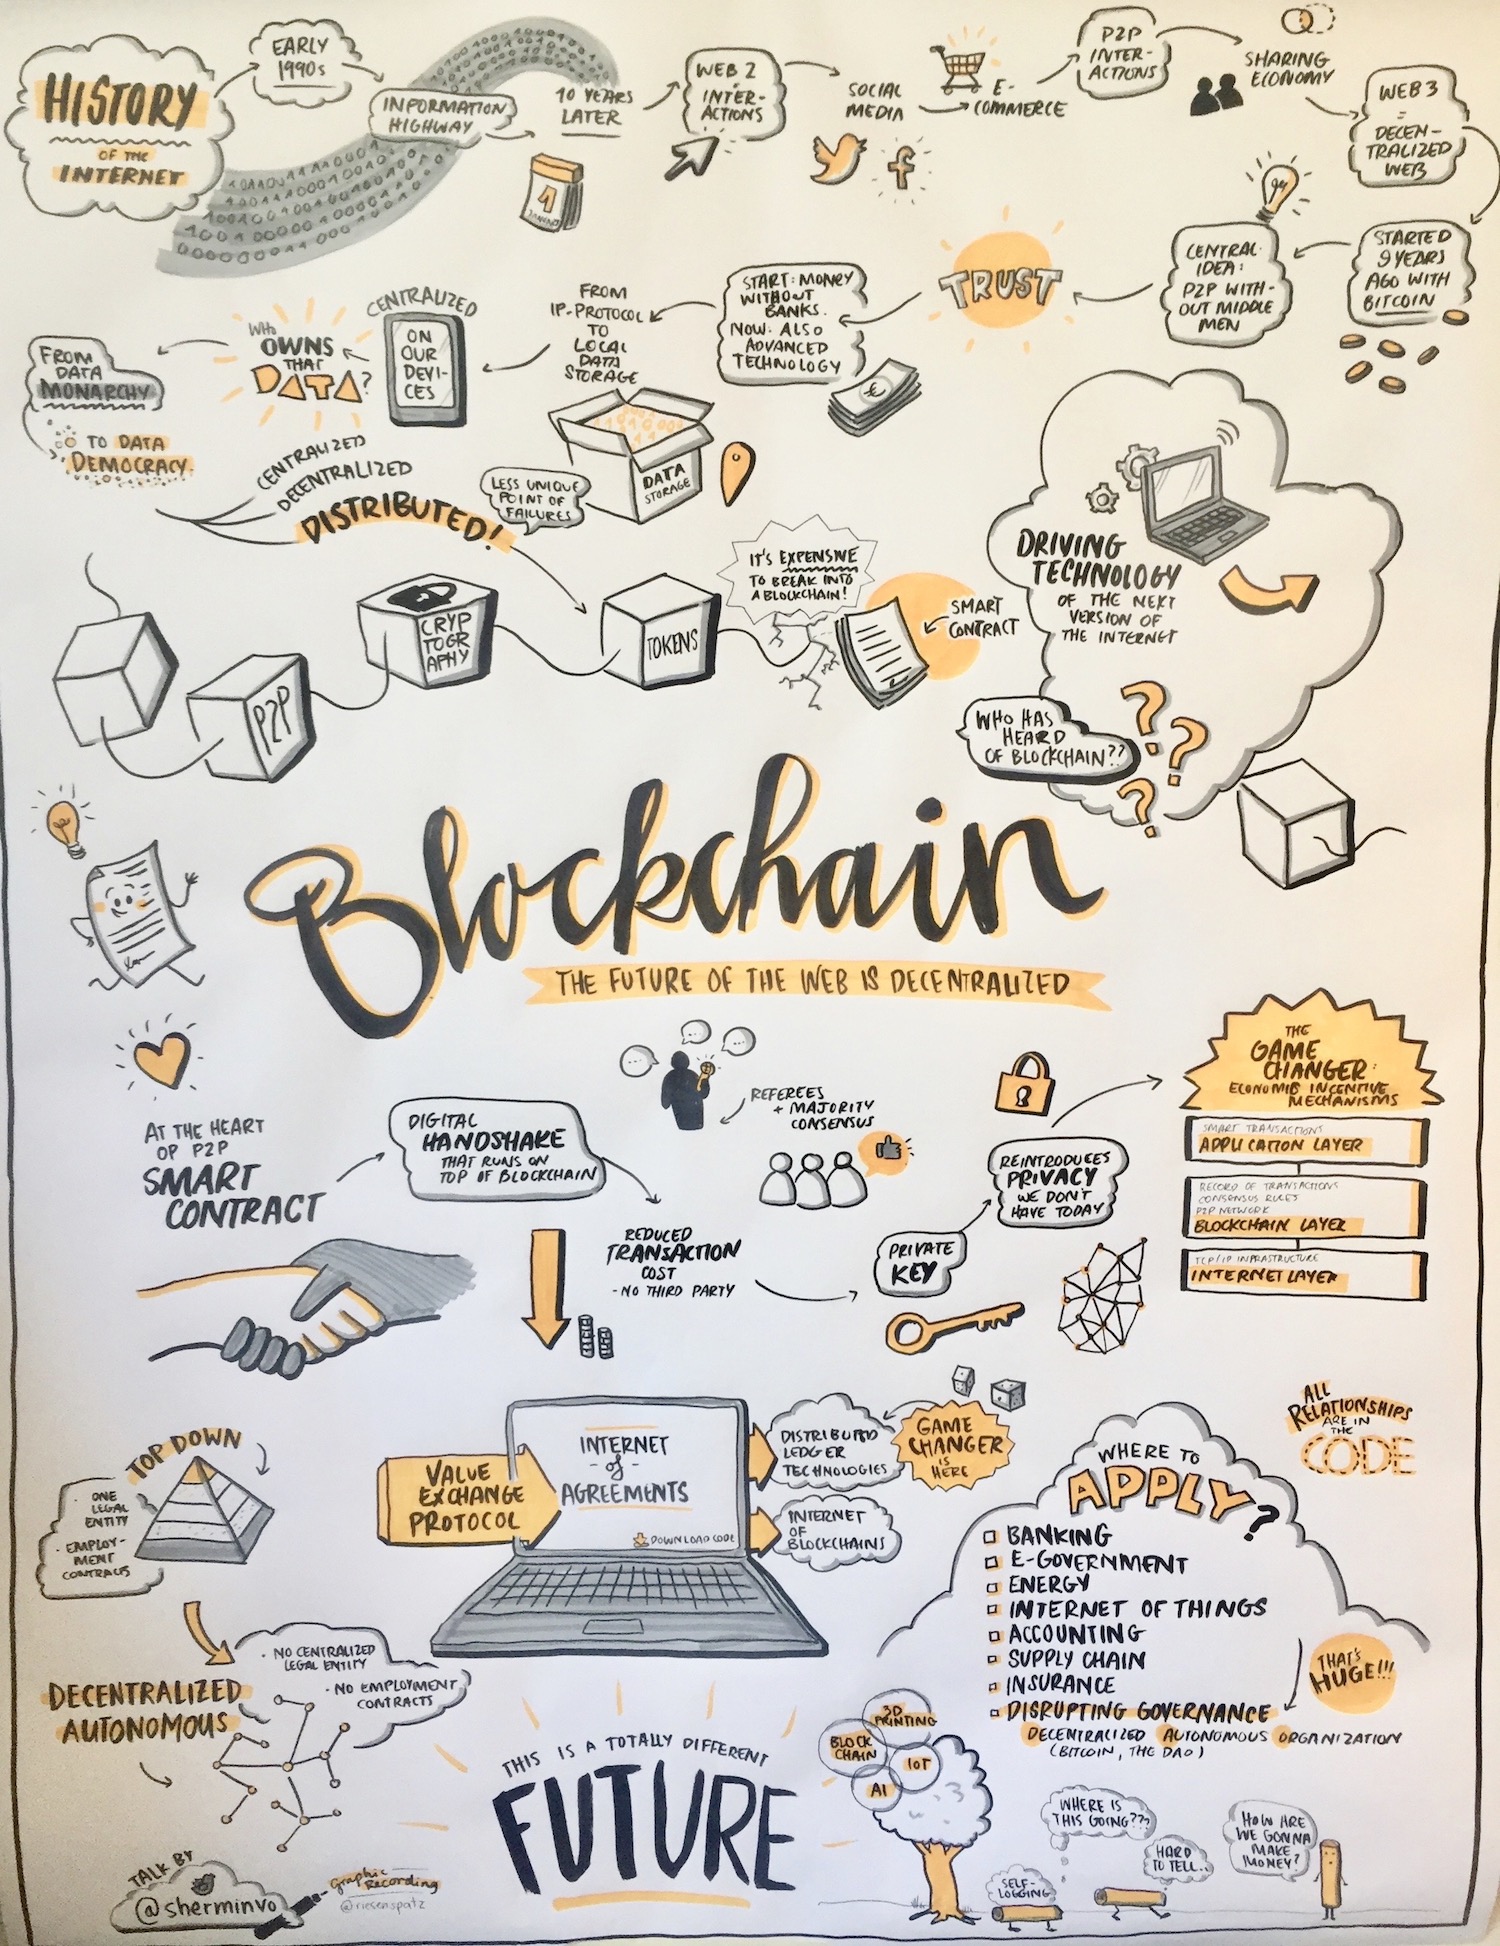 Blockchain and the decentralized web.JPG